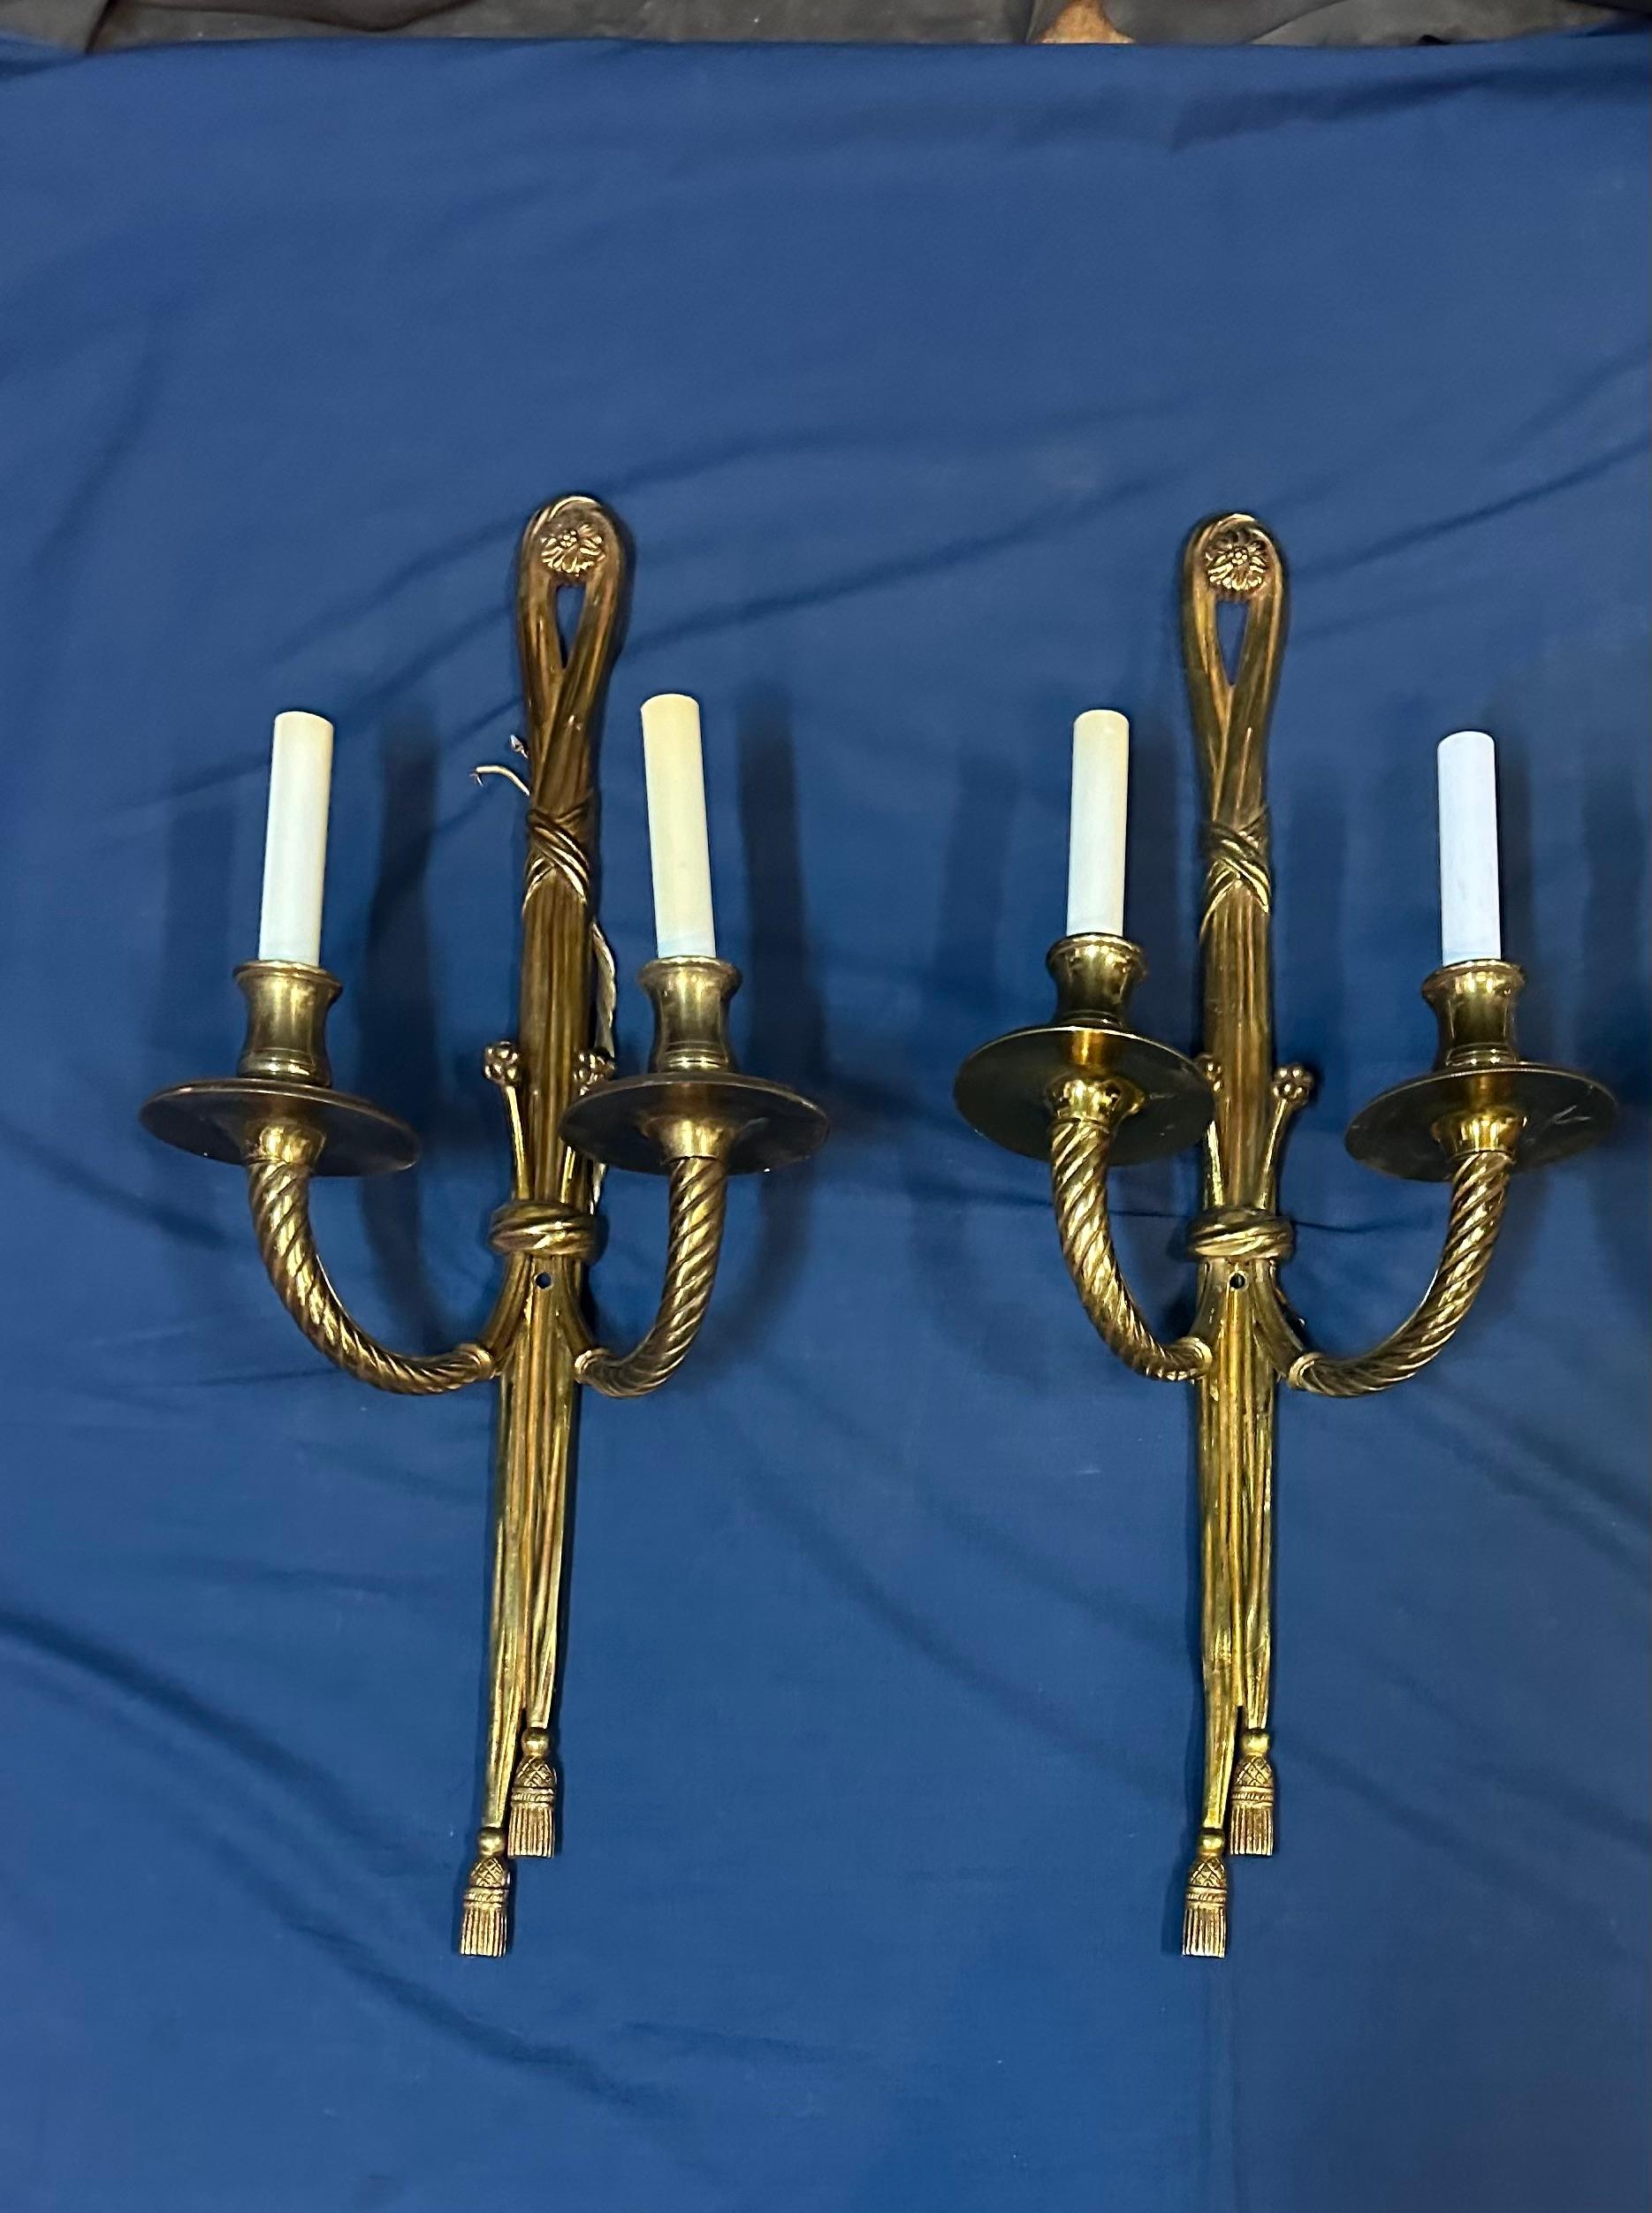 This vintage group of four matching French cast bronze wall sconces date from the early 1900’s. These sculpted sconces display a fashionable ribbon & tassel motif & an understated elegance that creates a proper accent for the right room setting. 